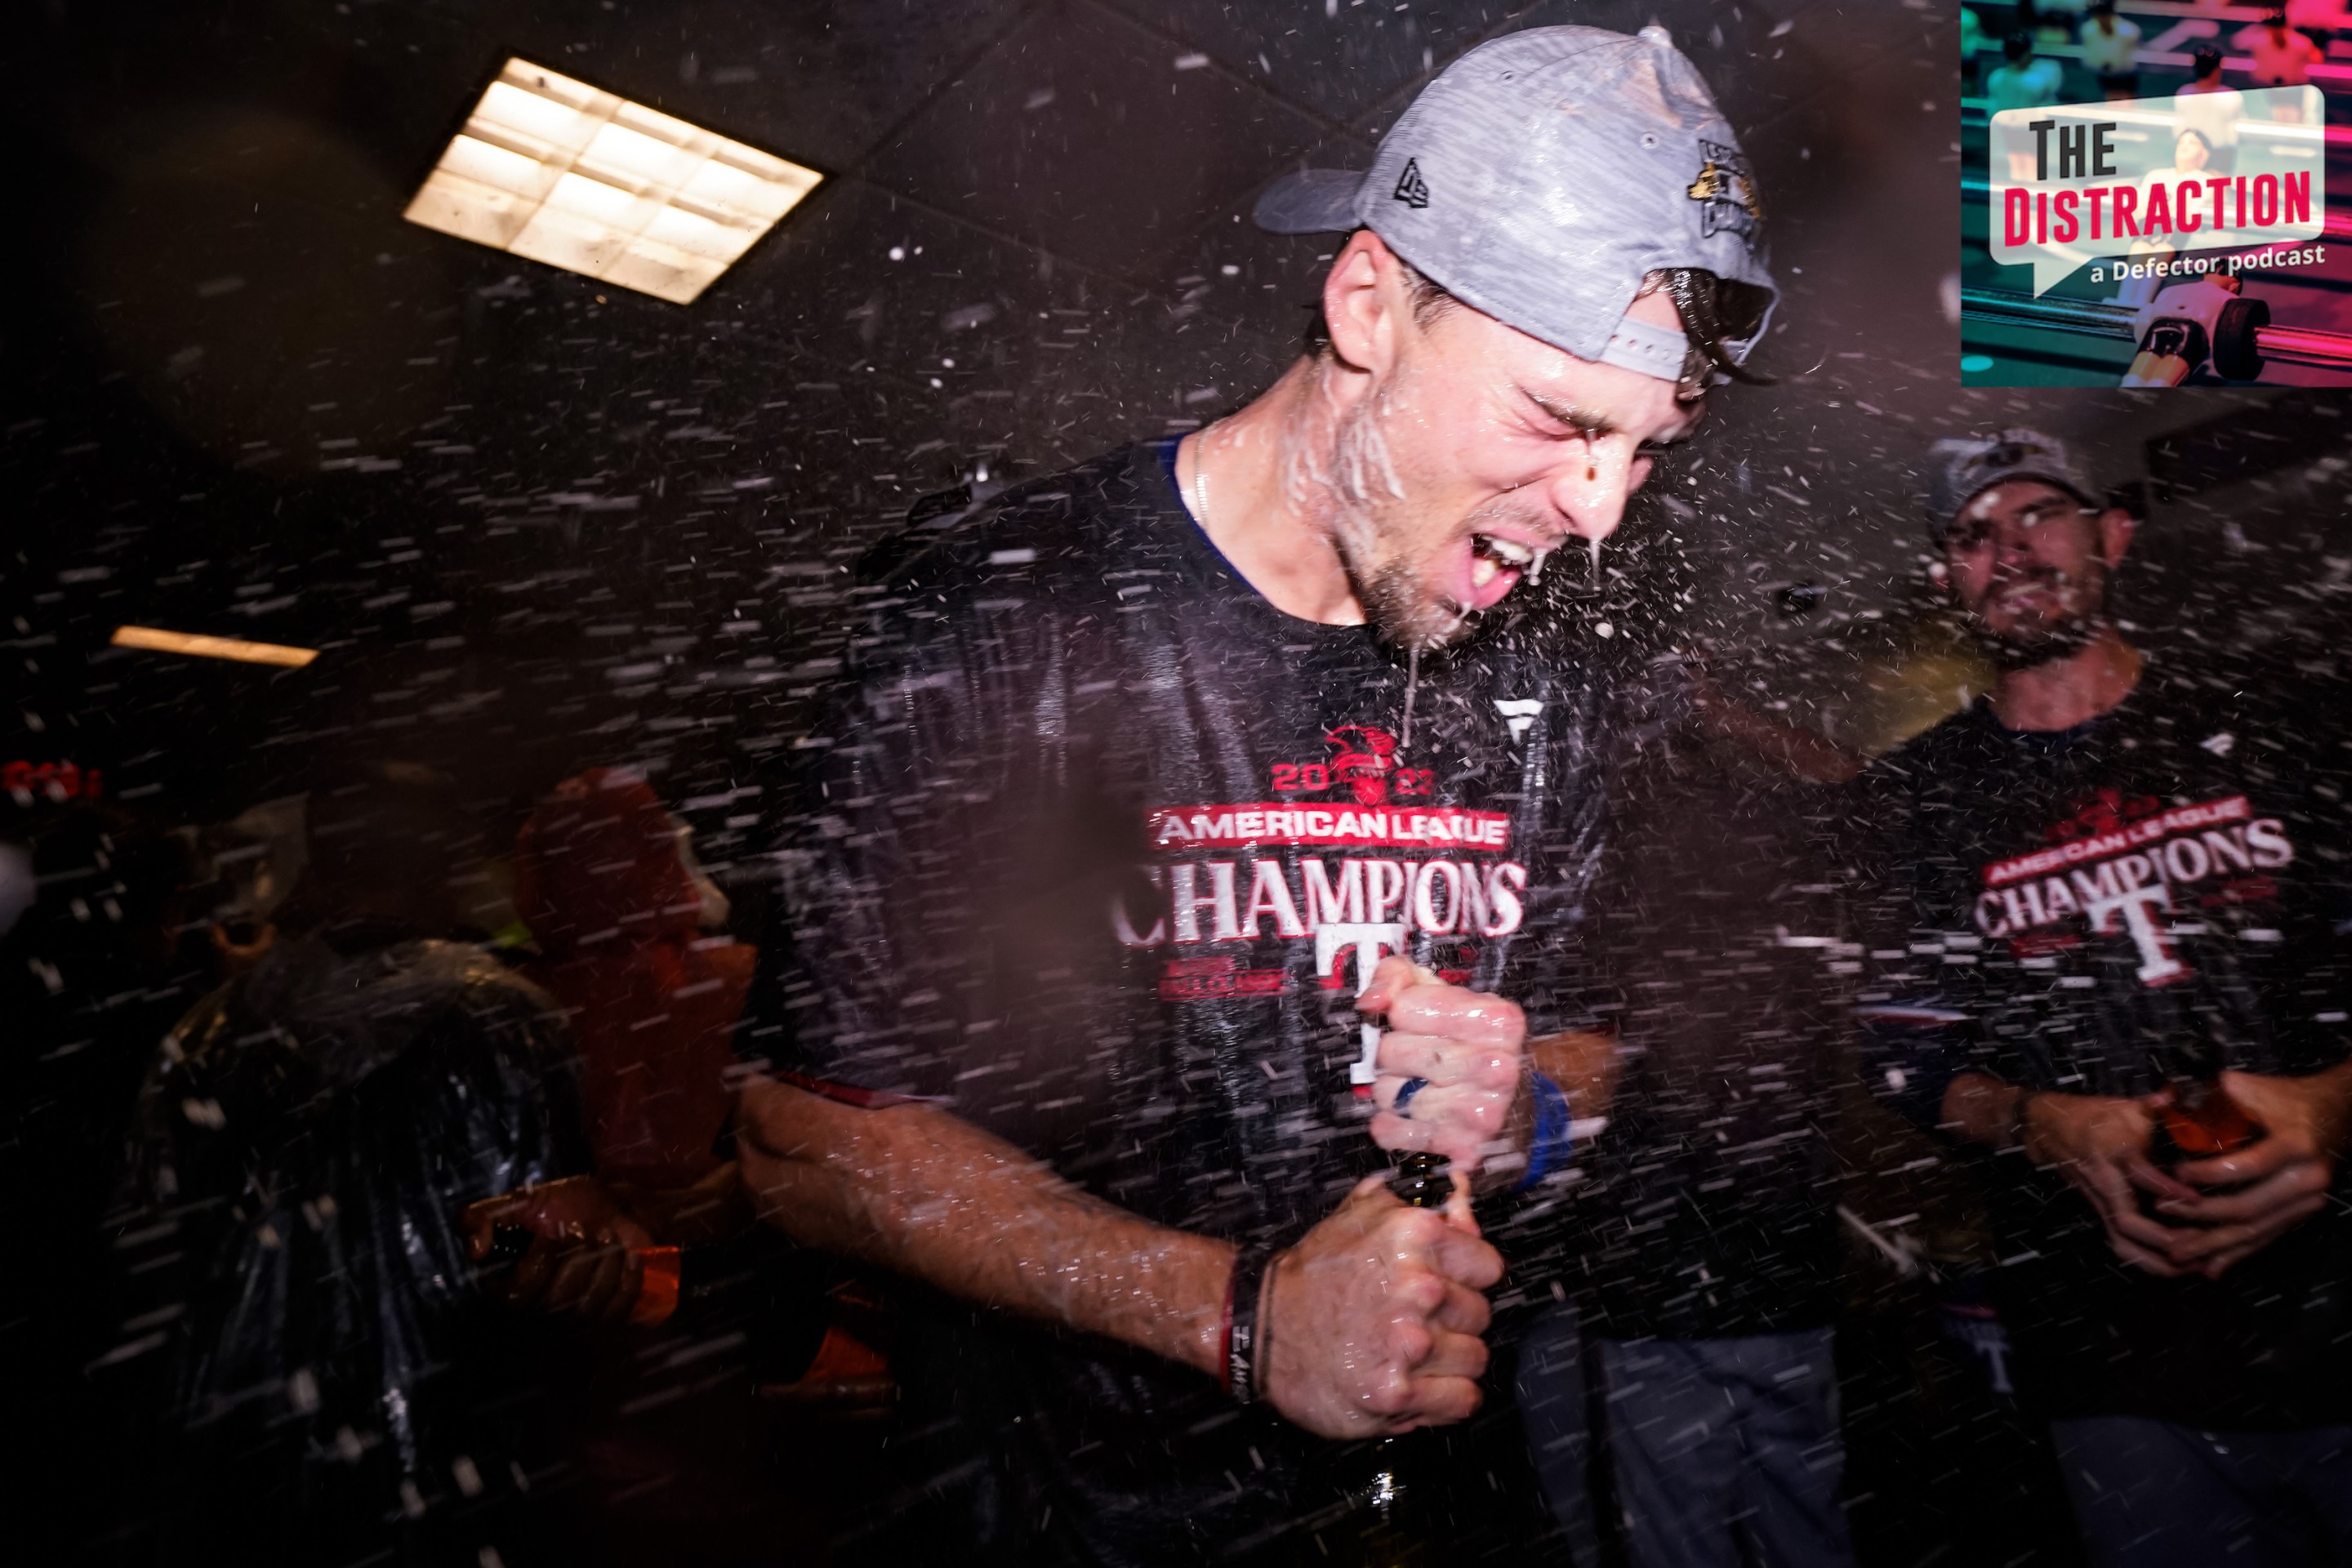 Evan Carter of the Texas Rangers celebrates in the clubhouse after beating the Astros in Game 7 of the ALCS.